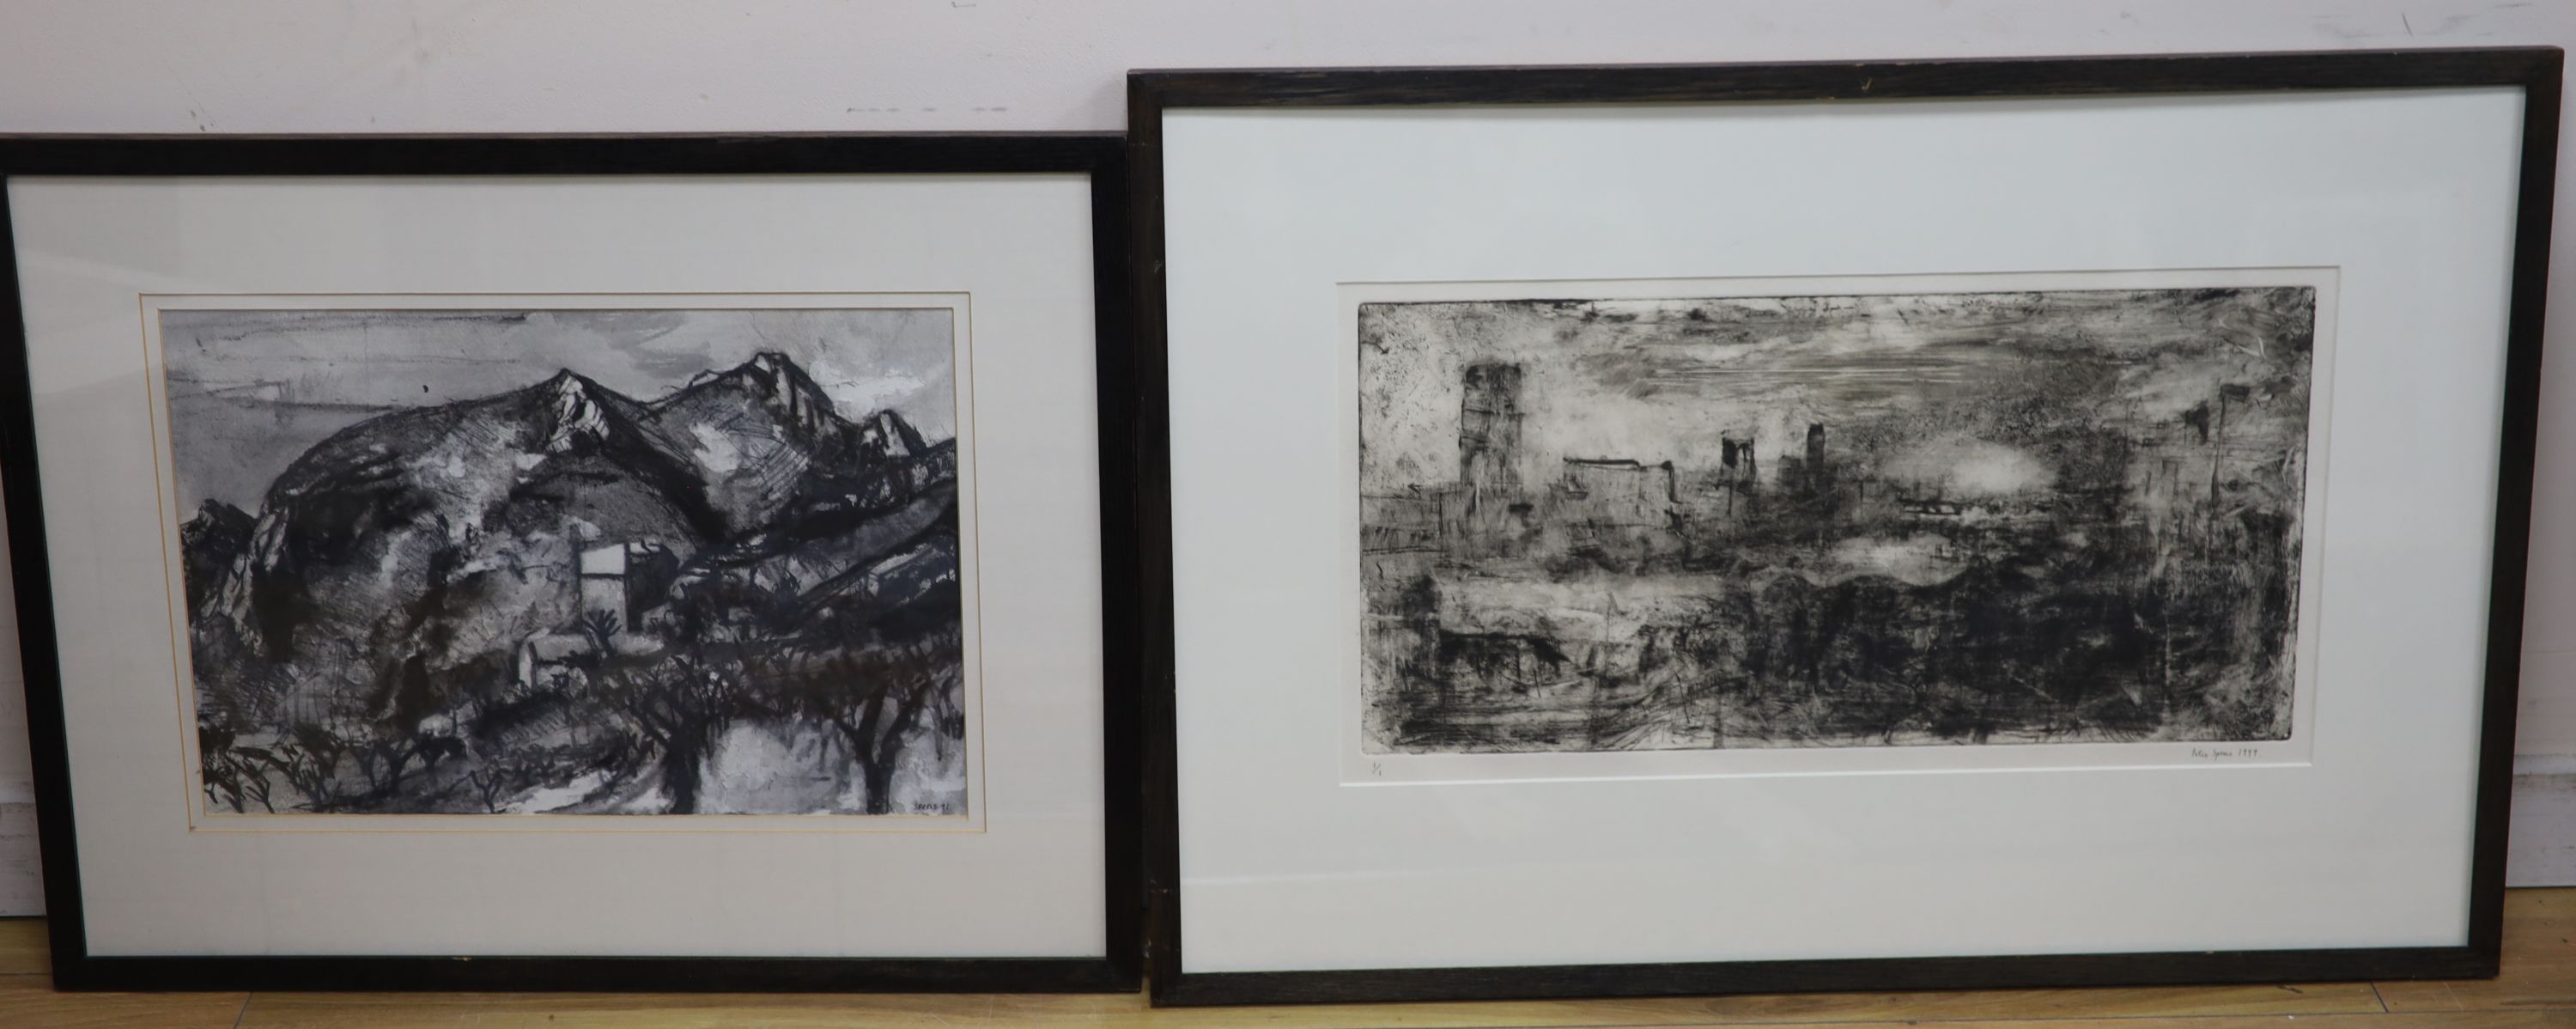 Peter Spens (1961-), drypoint and monotype, Storm, the City from the Strand, signed in pencil and dated 1999, numbered 1/1, 30 x 60cm